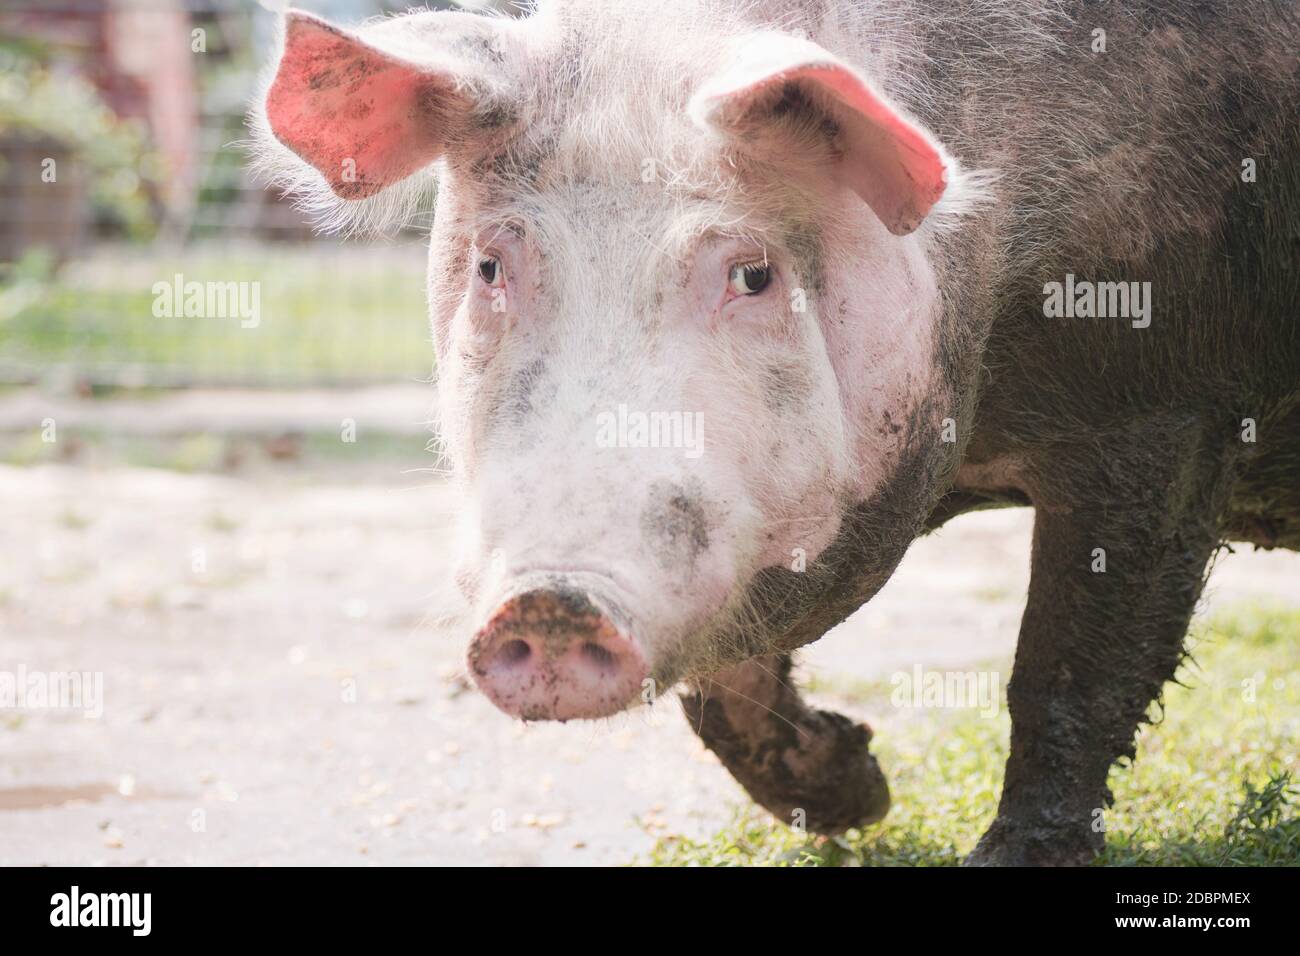 Animal portrait of dirty big domestic pig outdoors, pig breeding concept. Stock Photo